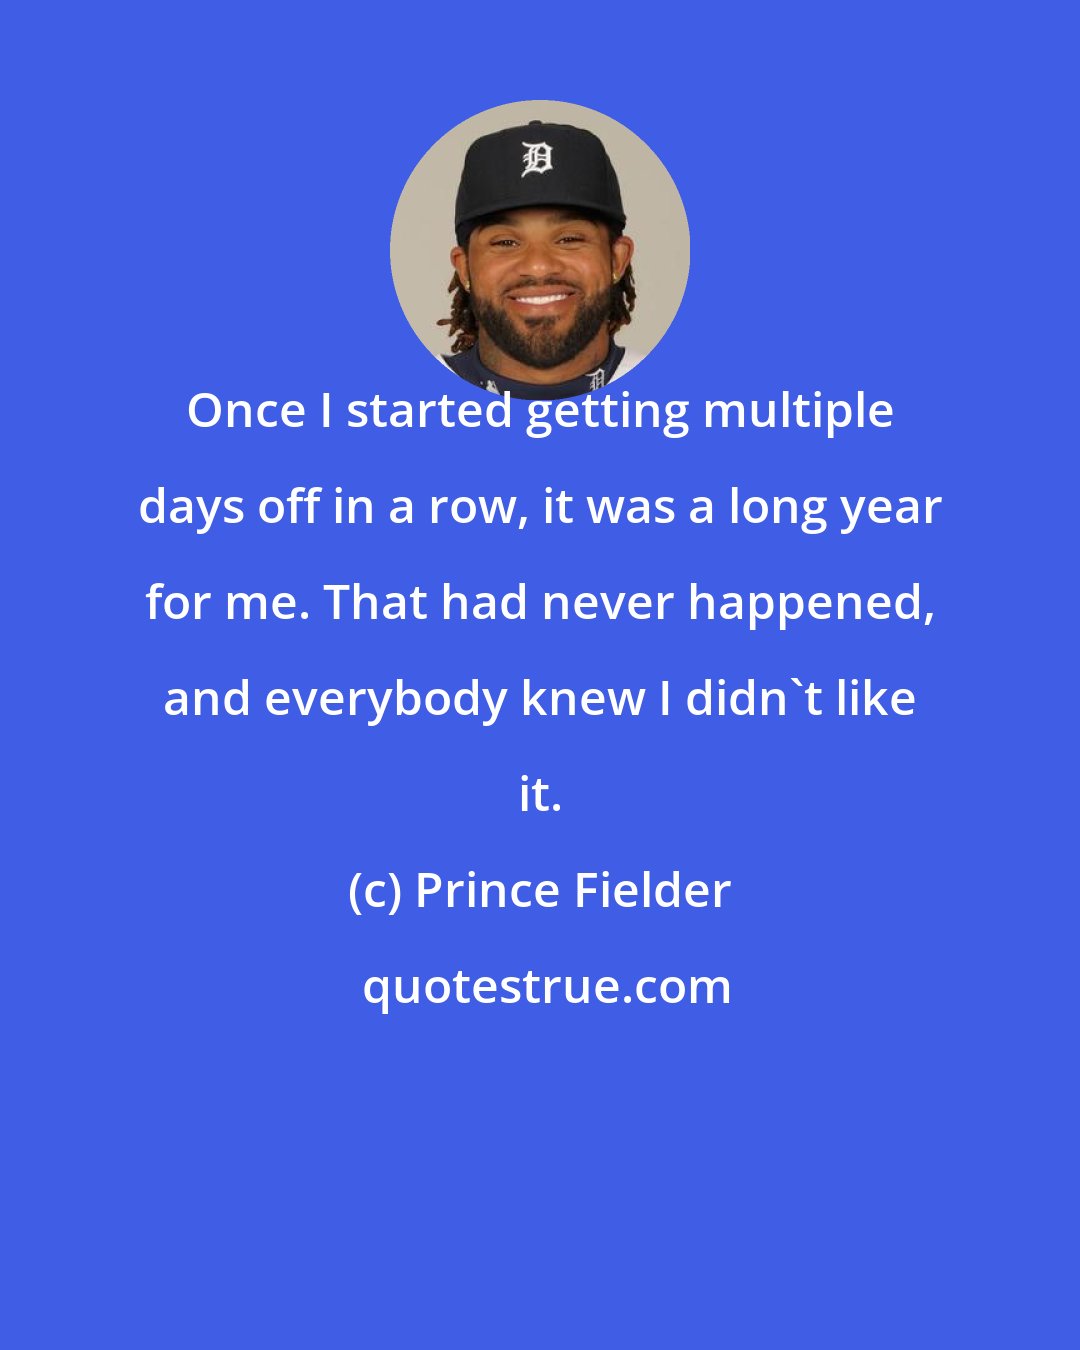 Prince Fielder: Once I started getting multiple days off in a row, it was a long year for me. That had never happened, and everybody knew I didn't like it.